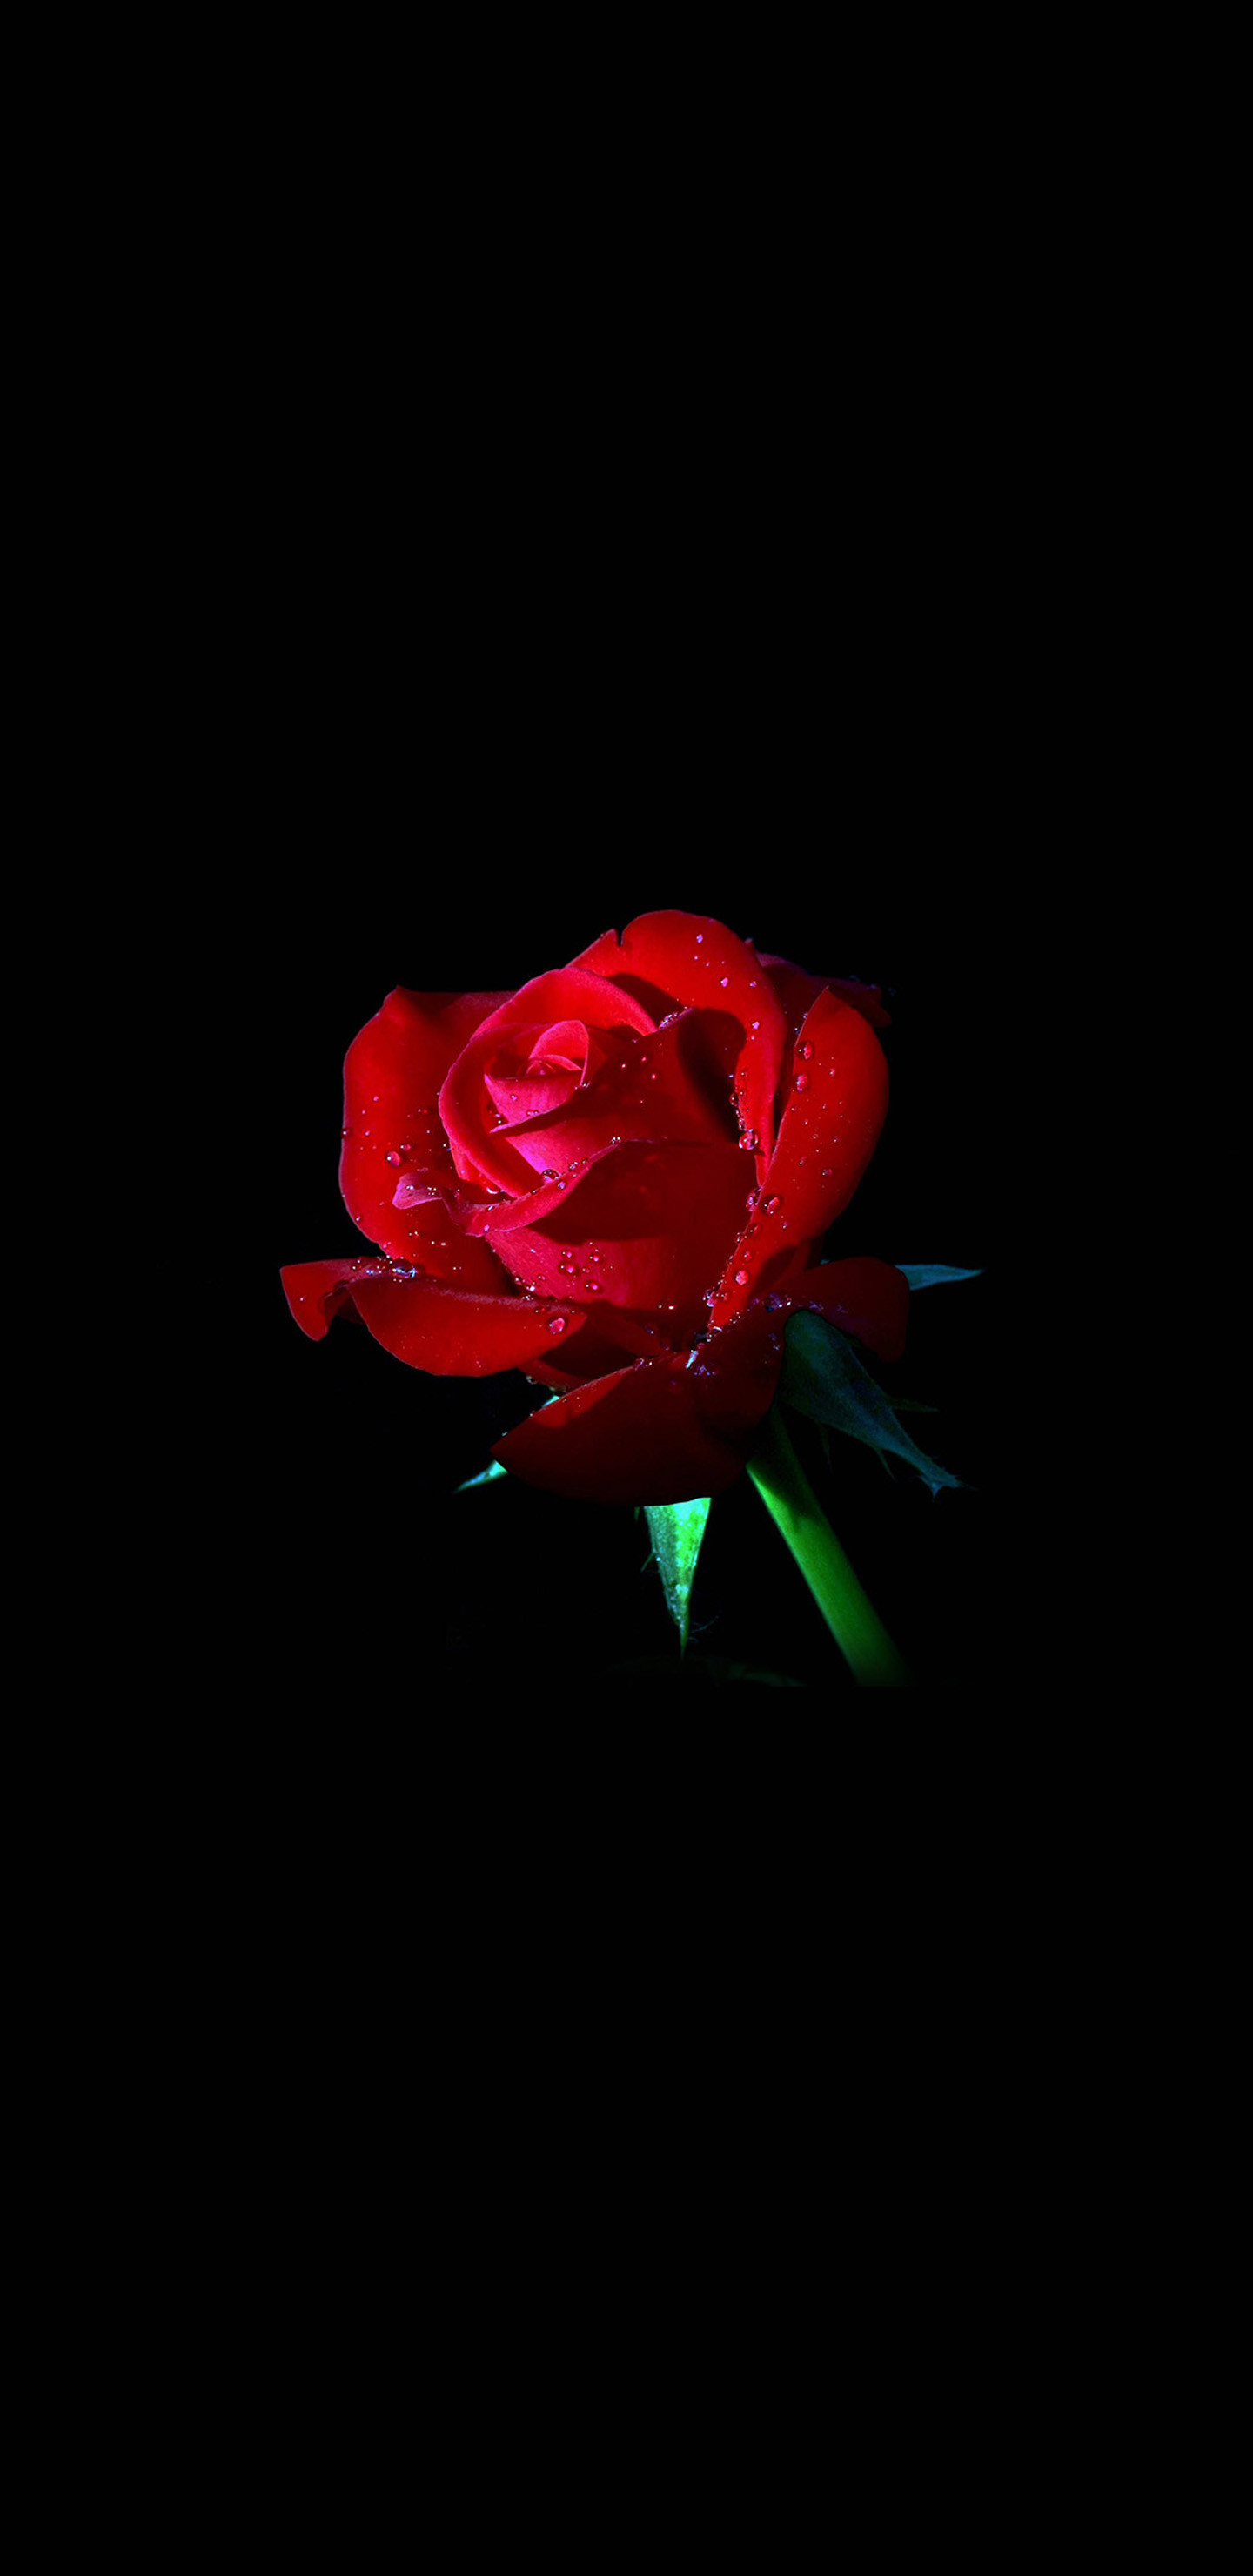 1440x2960 Red roses black background Galaxy Note 8 Wallpaper